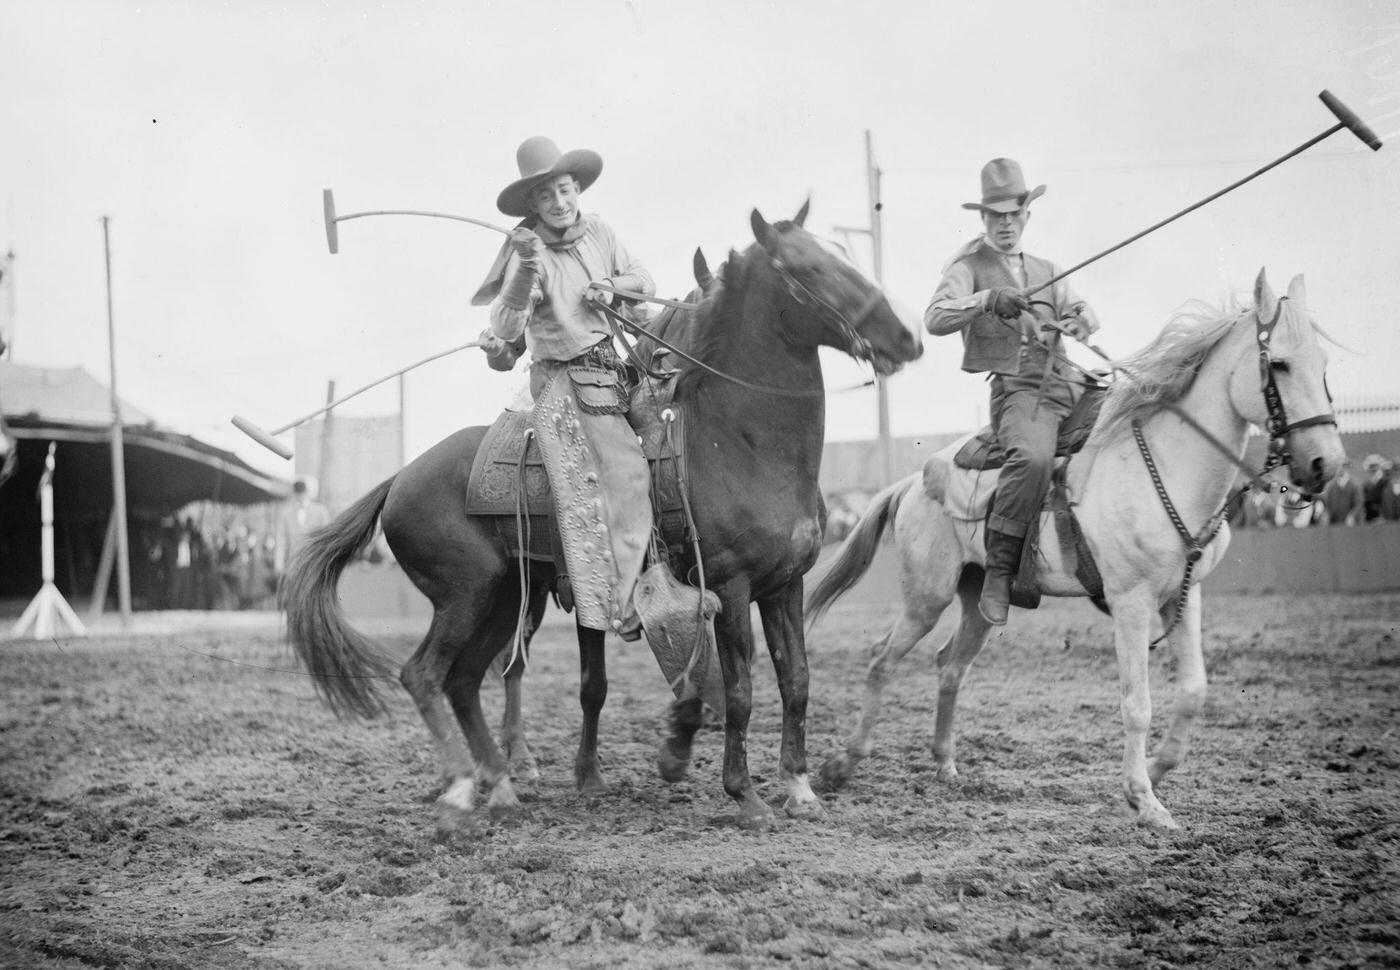 Wild West Polo Played by Cowboys on Horses at Coney Island, 1900